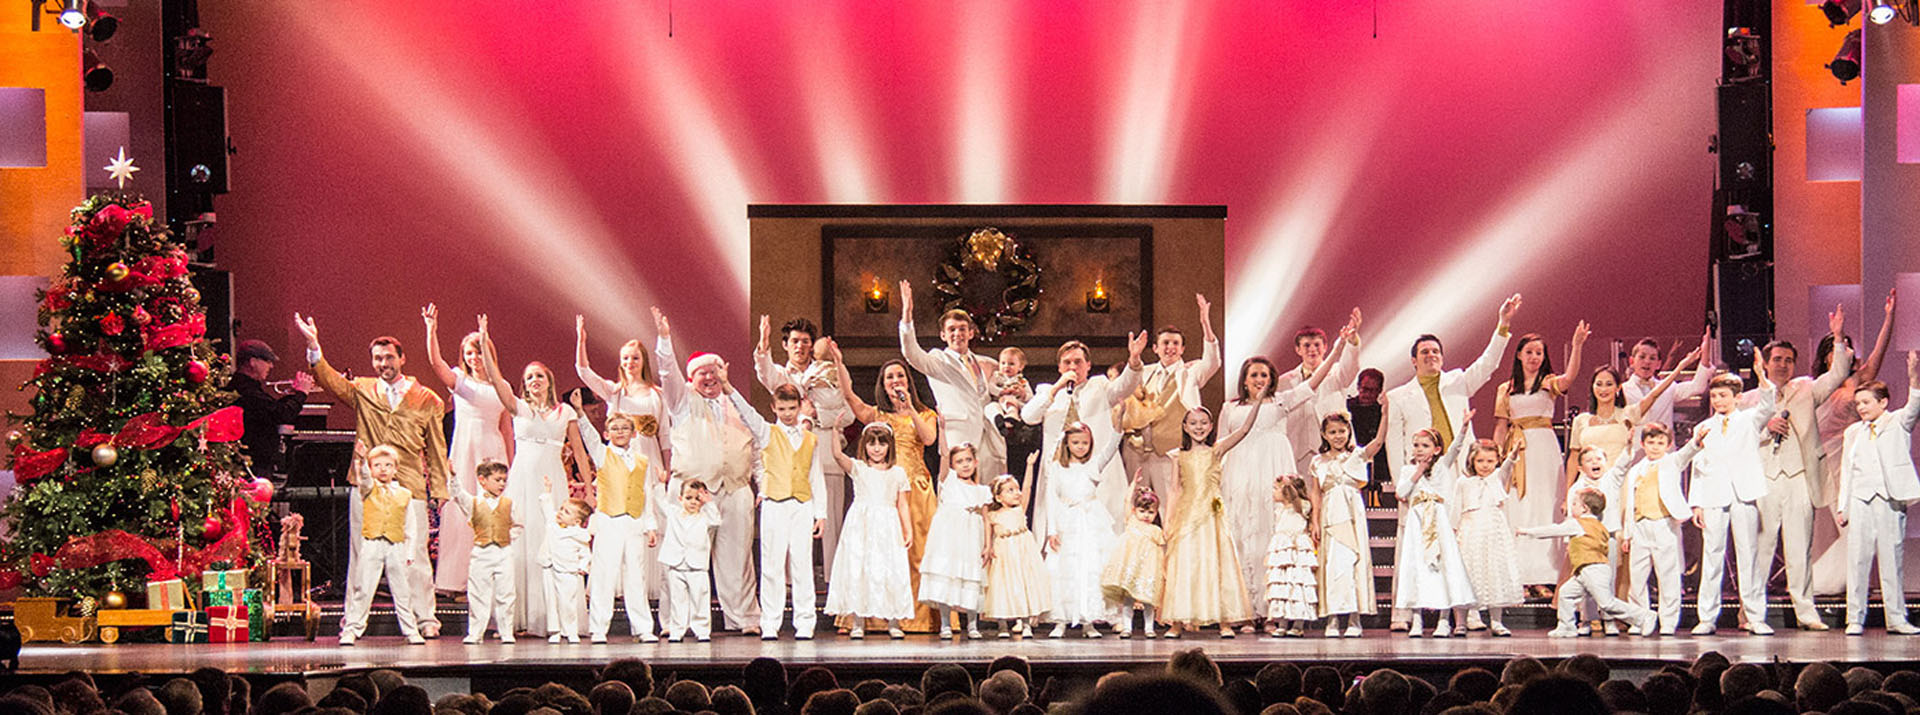 The Best of Branson Christmas Shows